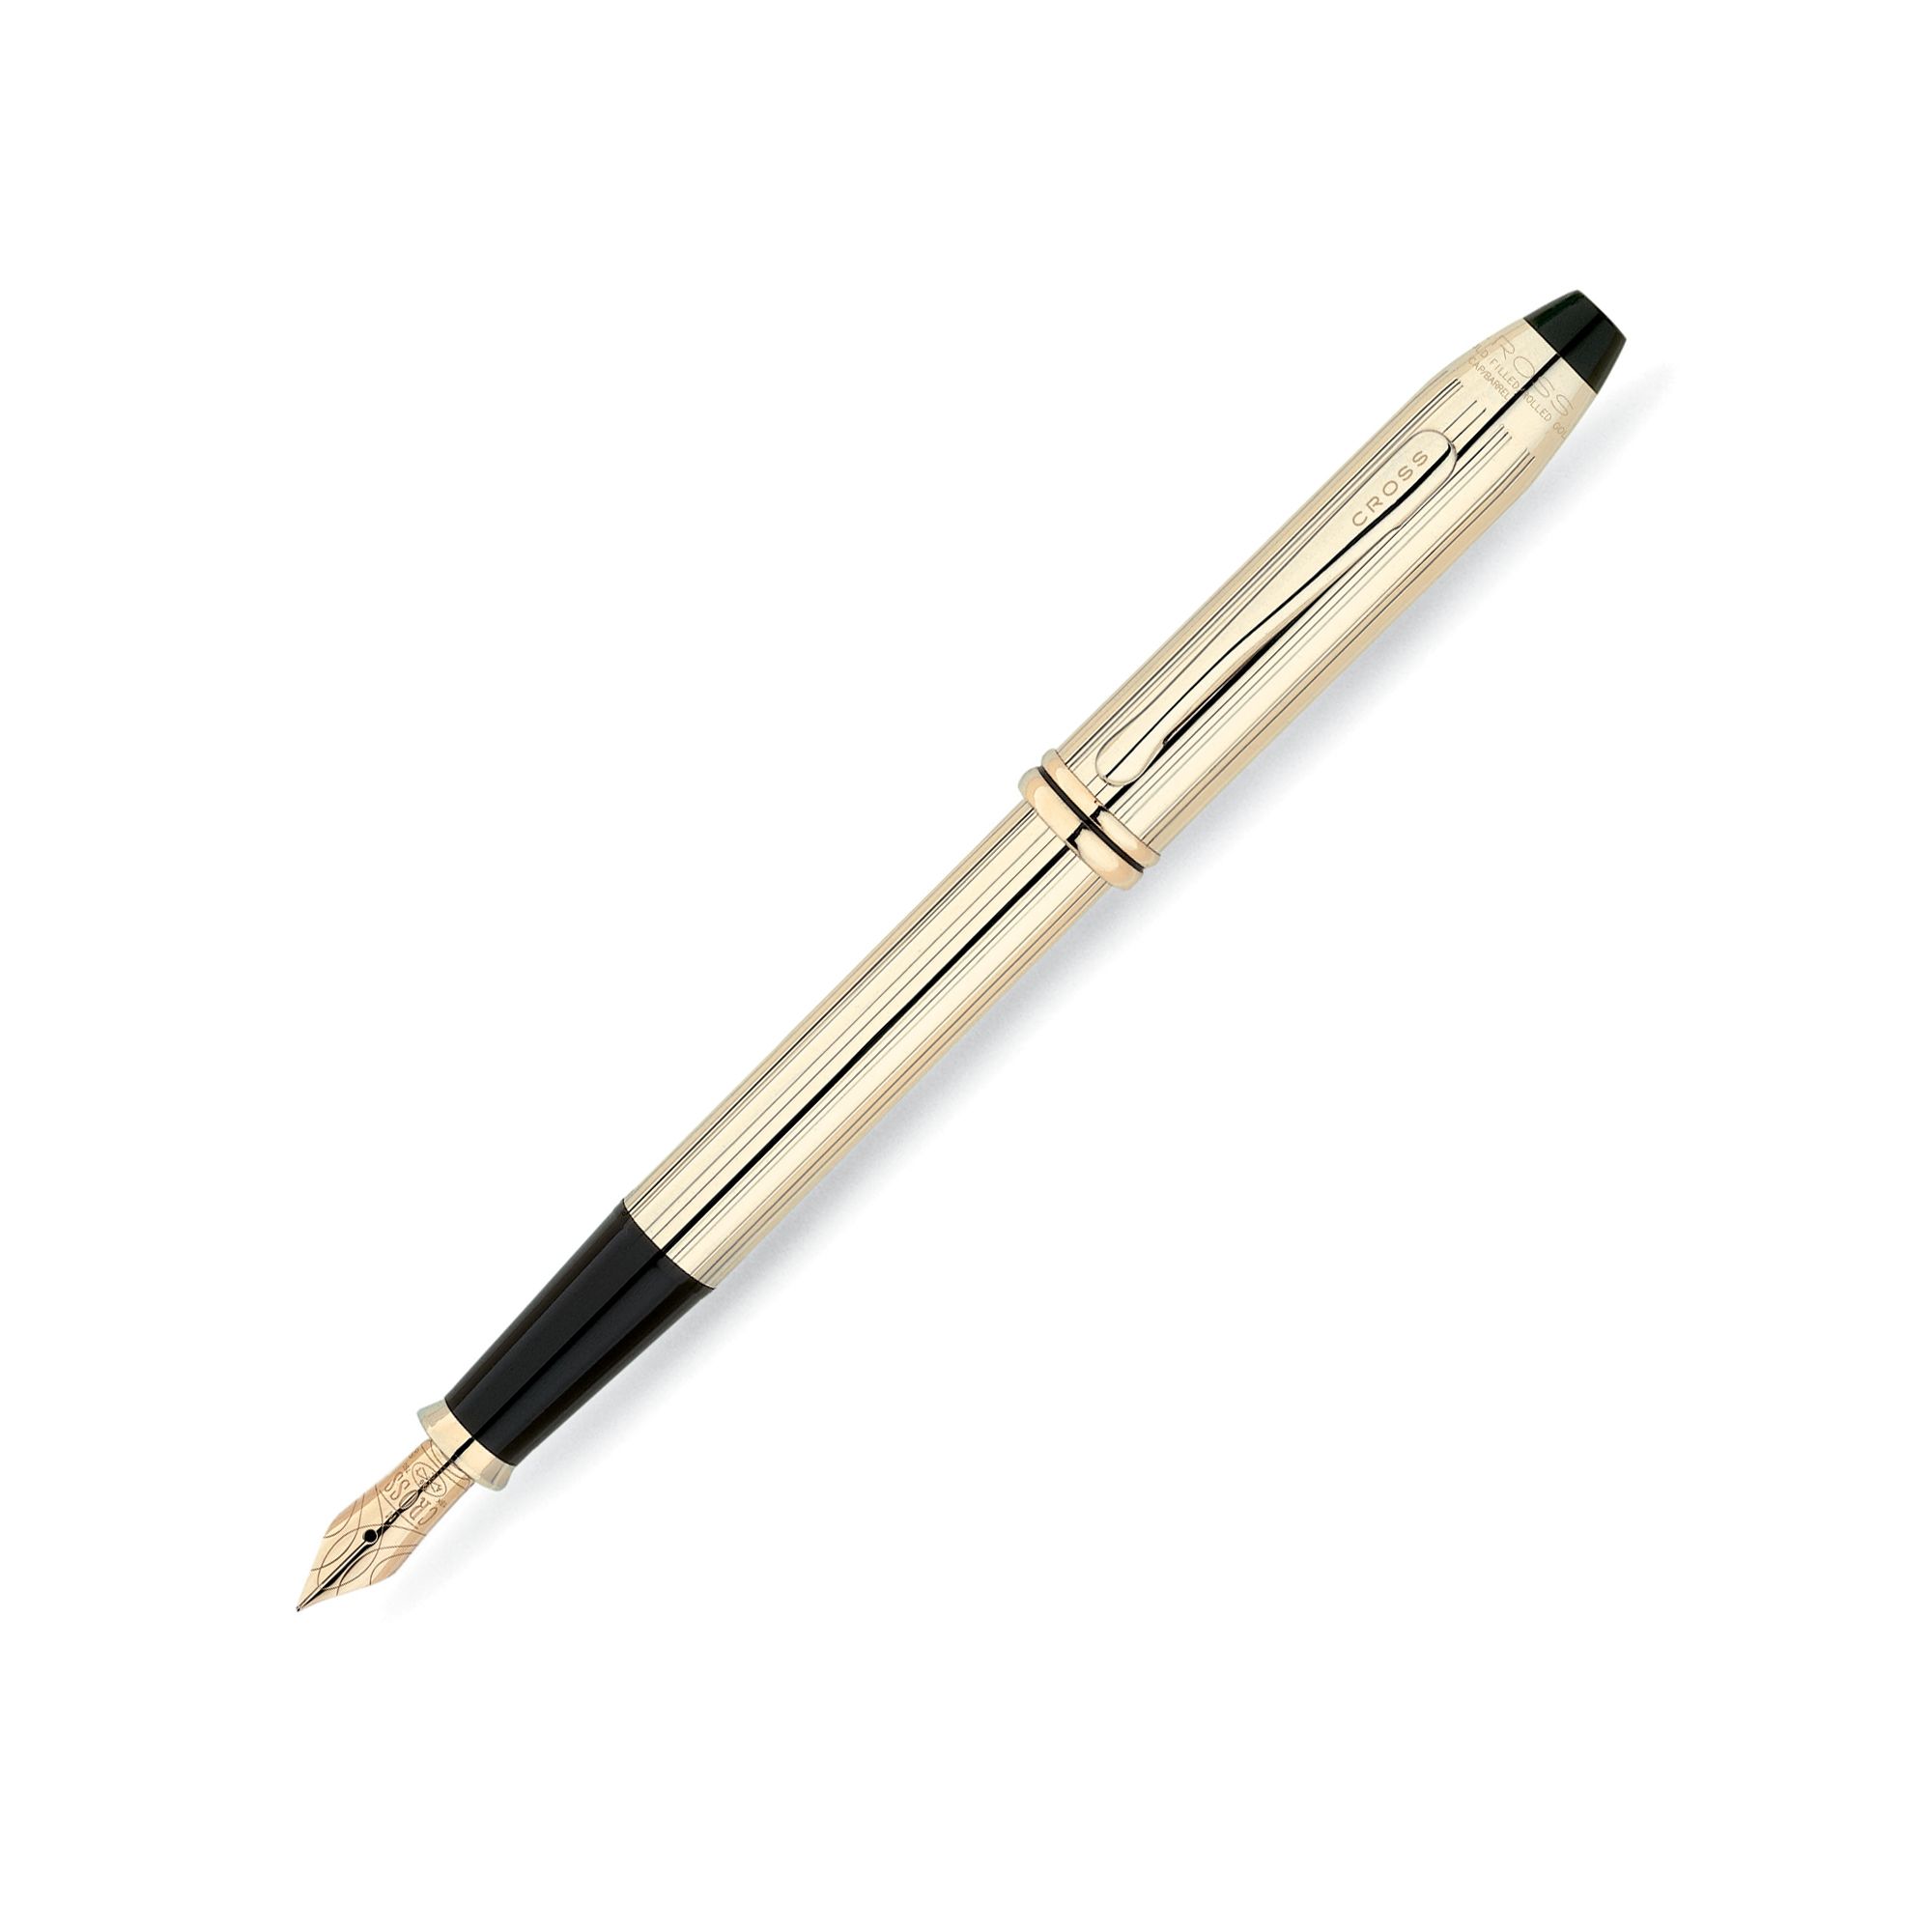 Cross Townsend 10K Rolled Gold Fountain pen at Tescos Direct